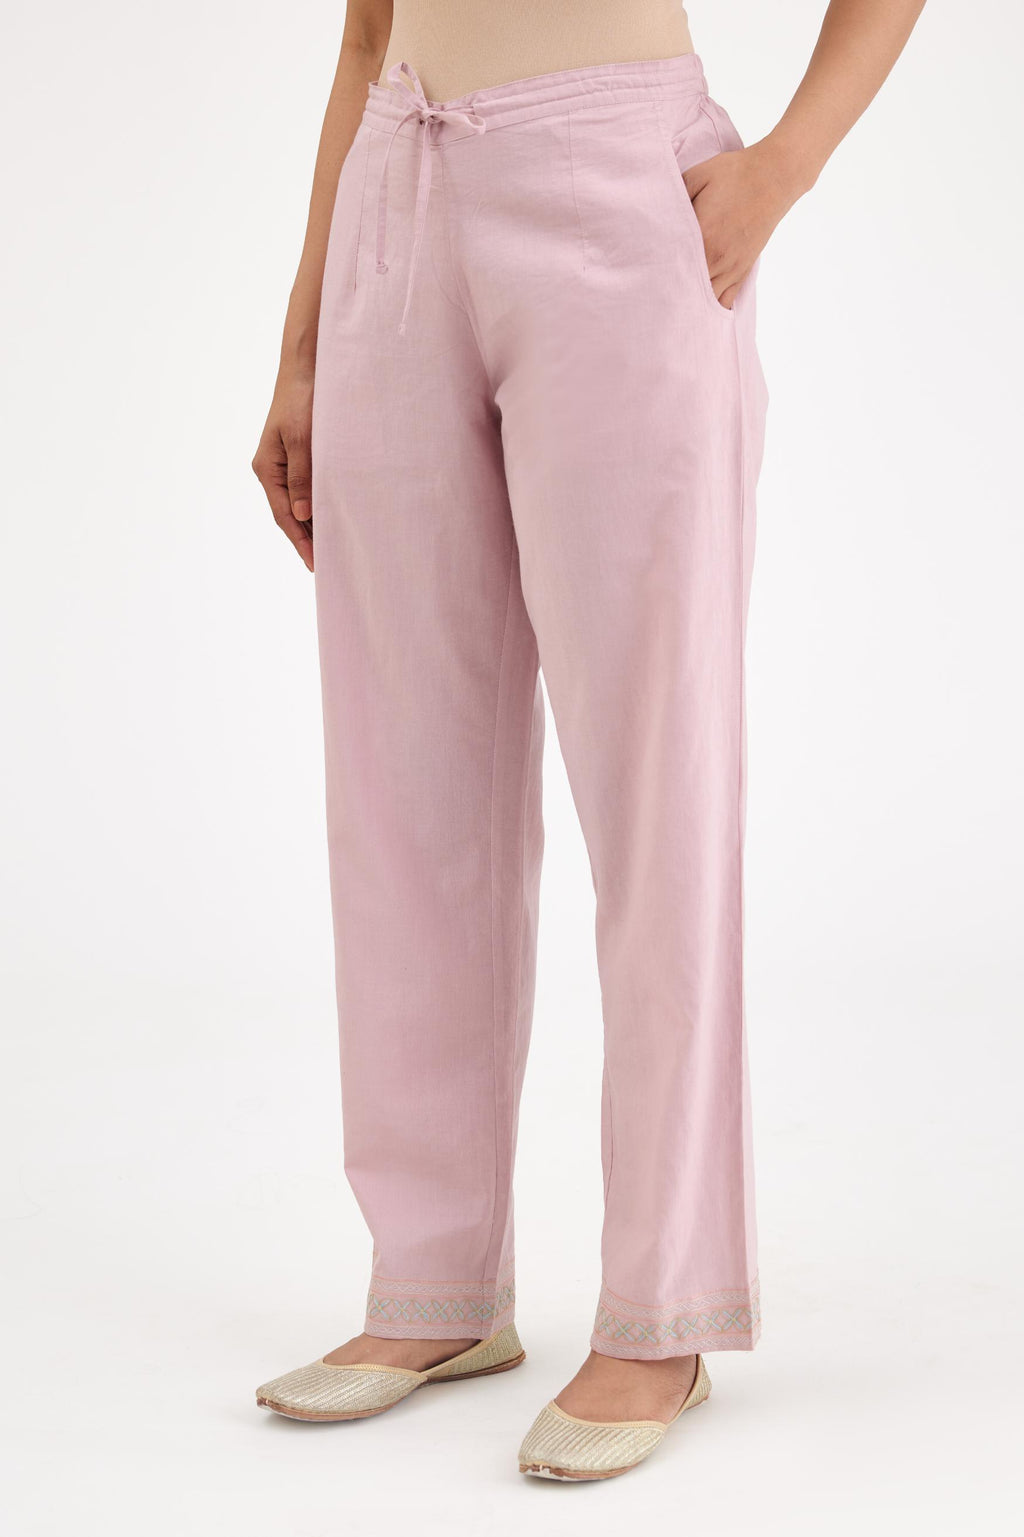 Pink cotton straight pants with multi colored thread embroidery, highlighted with silver zari embroidery at bottom hem